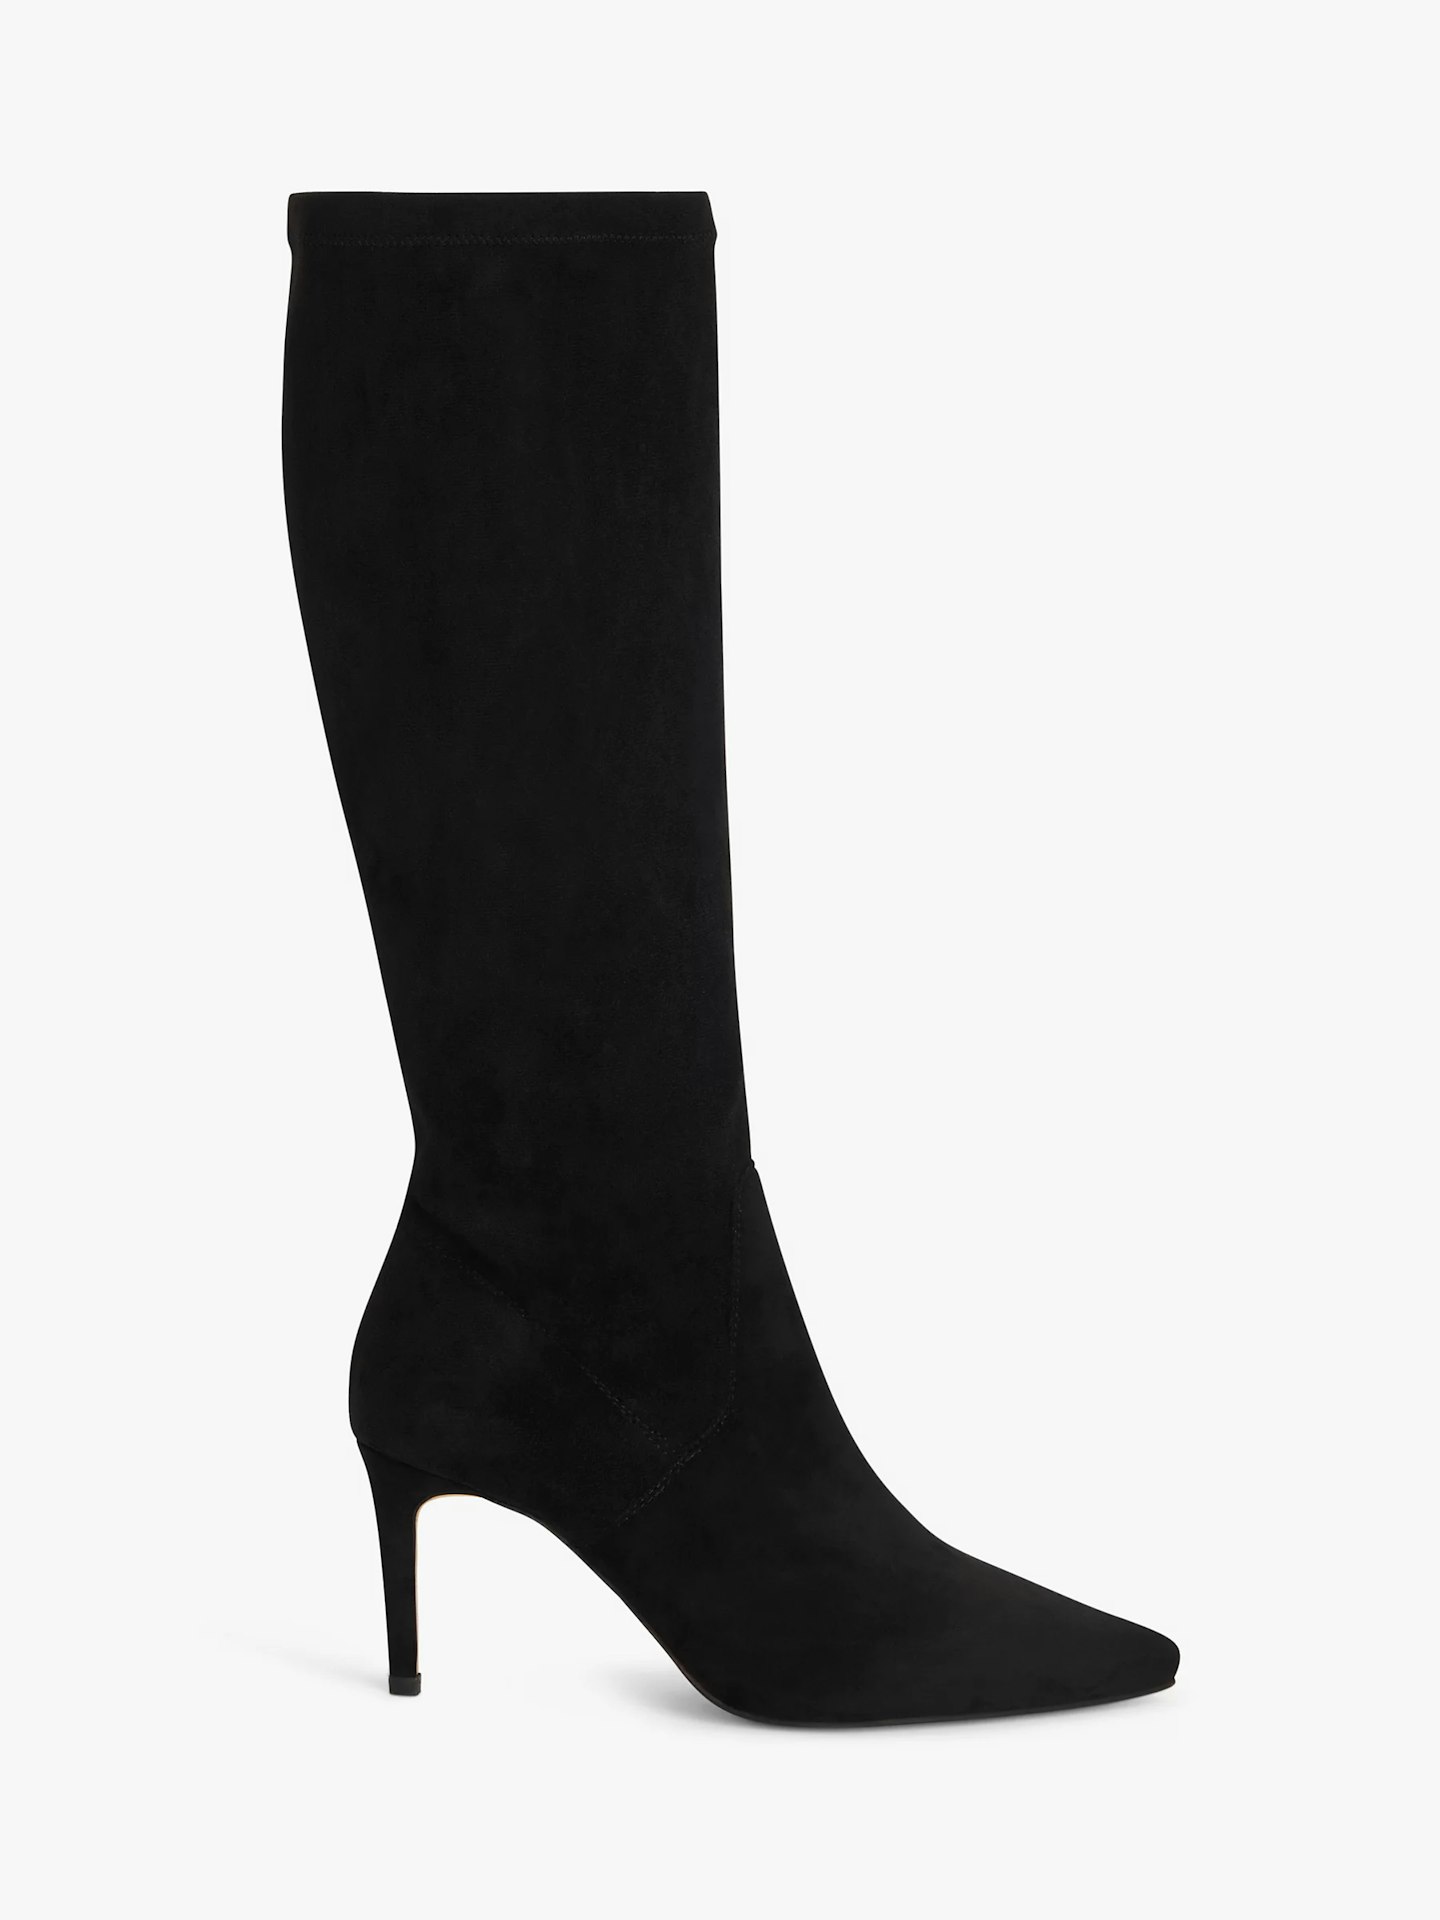 John Lewis  knee high boot outfits